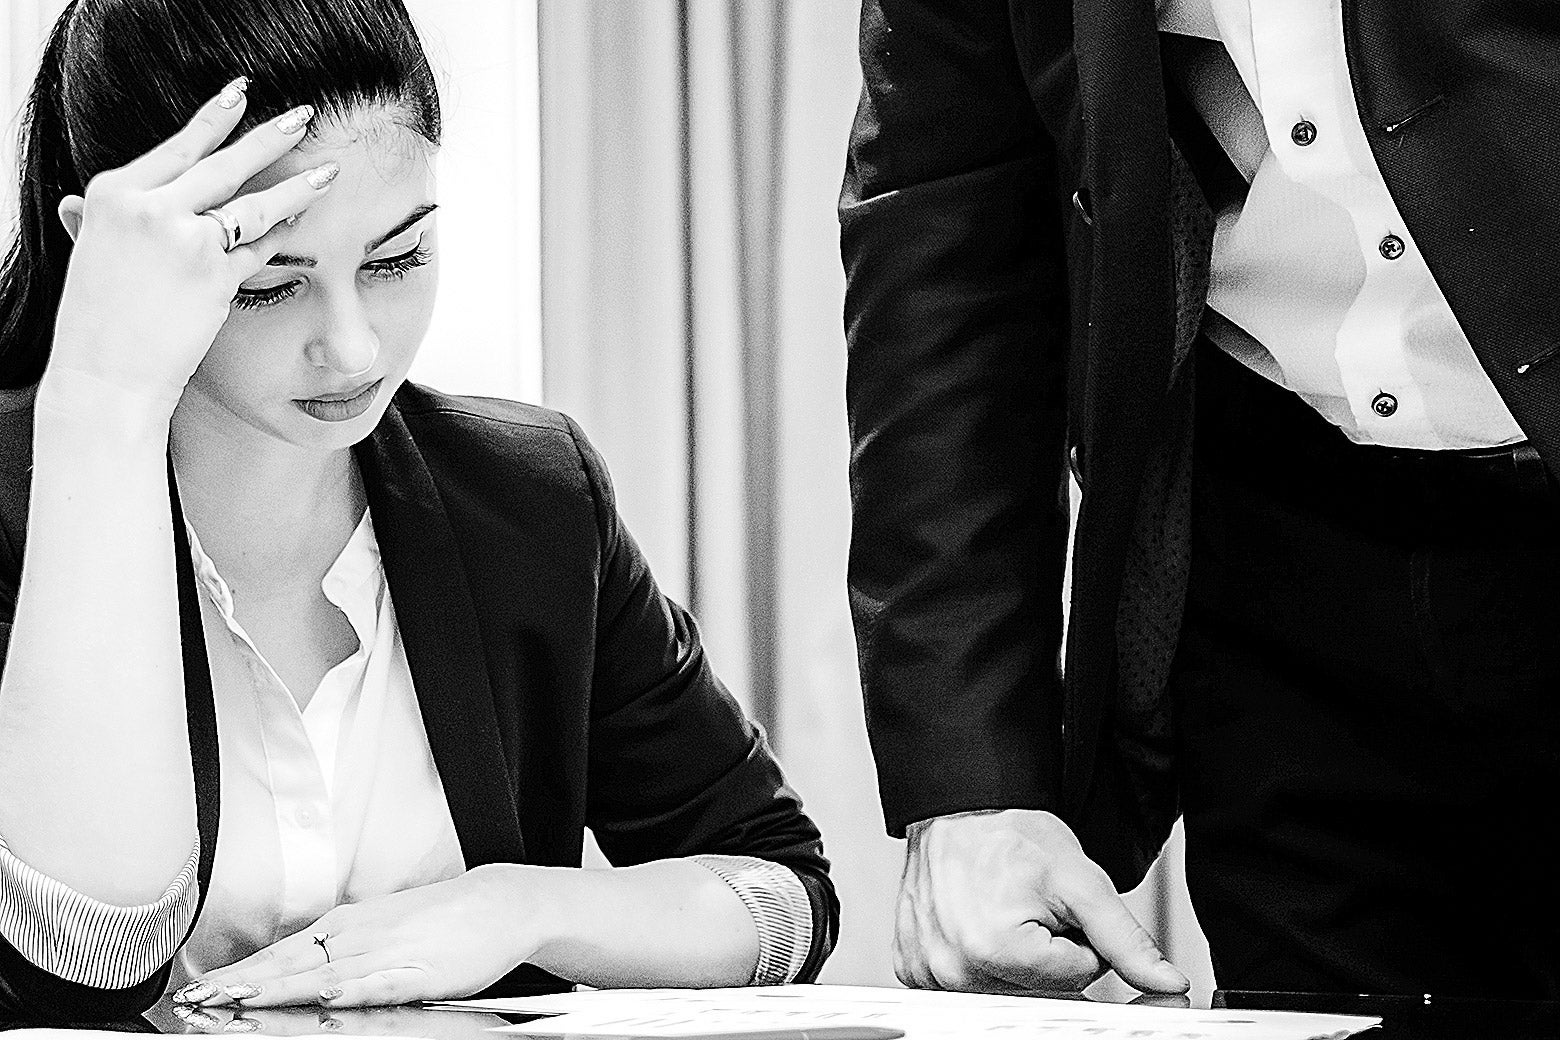 A woman in business attire stares down at some papers on a desk as a man stands over her.